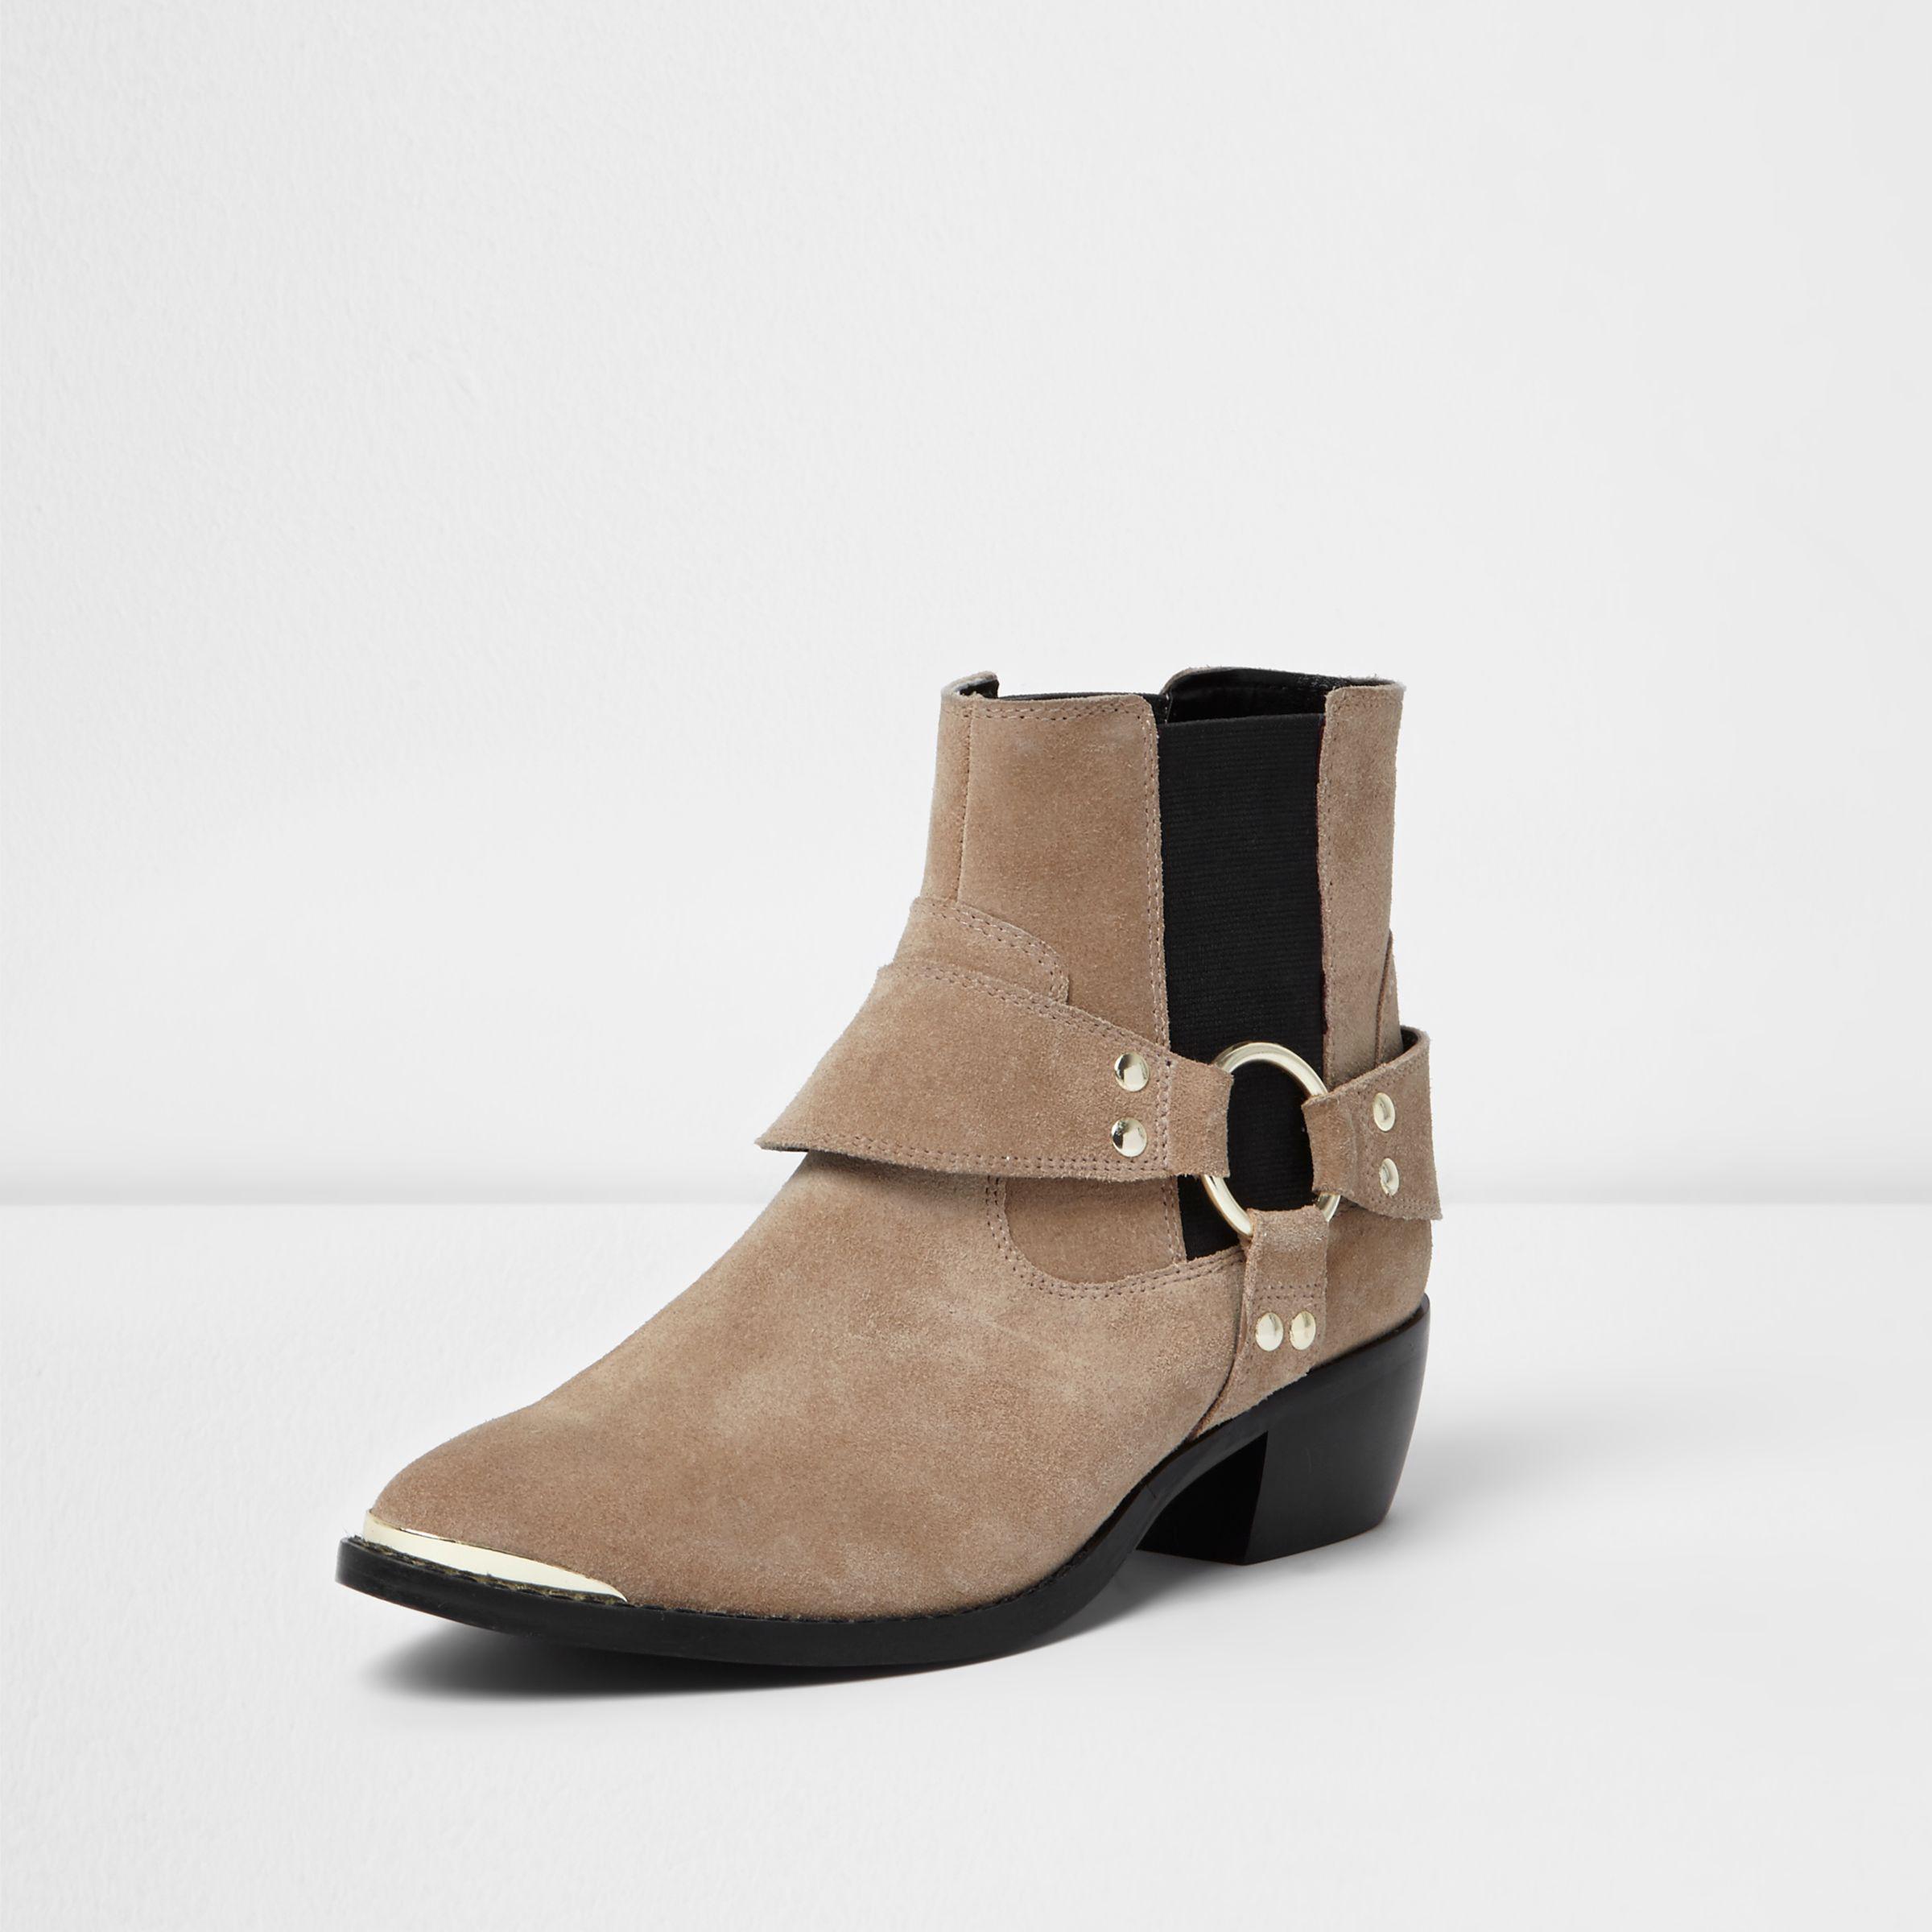 River Island Nude Suede Western Strap Ankle Boots in Natural - Lyst